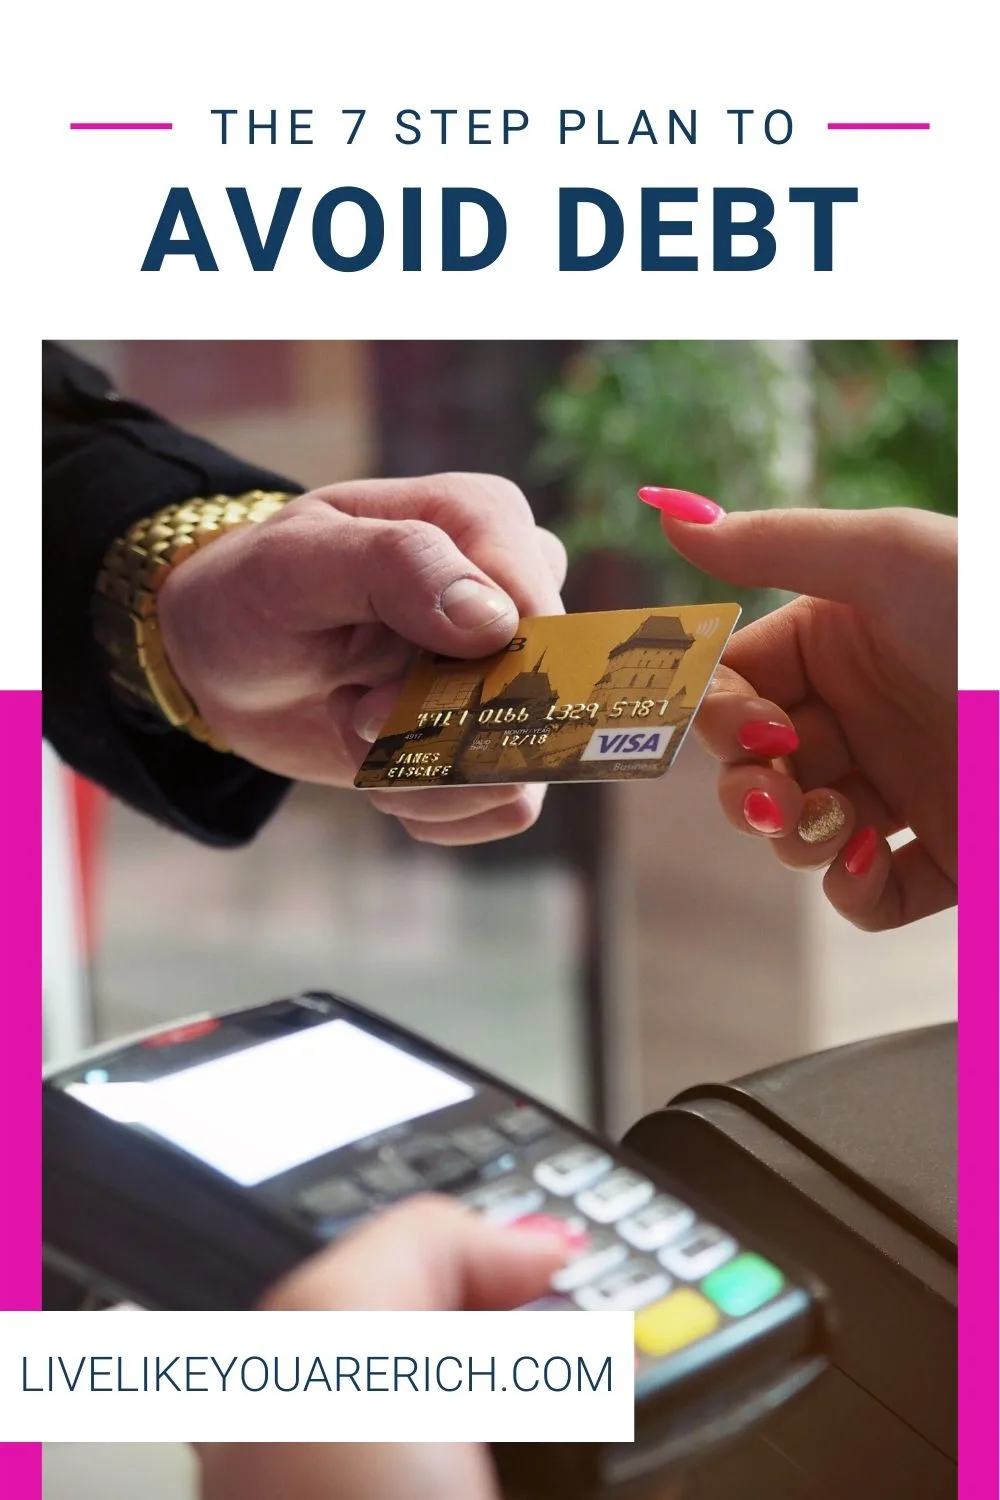 Avoid Debt. How to Avoid Debt. It is not how much you make, it is how much you keep. Here are 7 steps plan to avoid debt. #getoutofdebt #debtfree